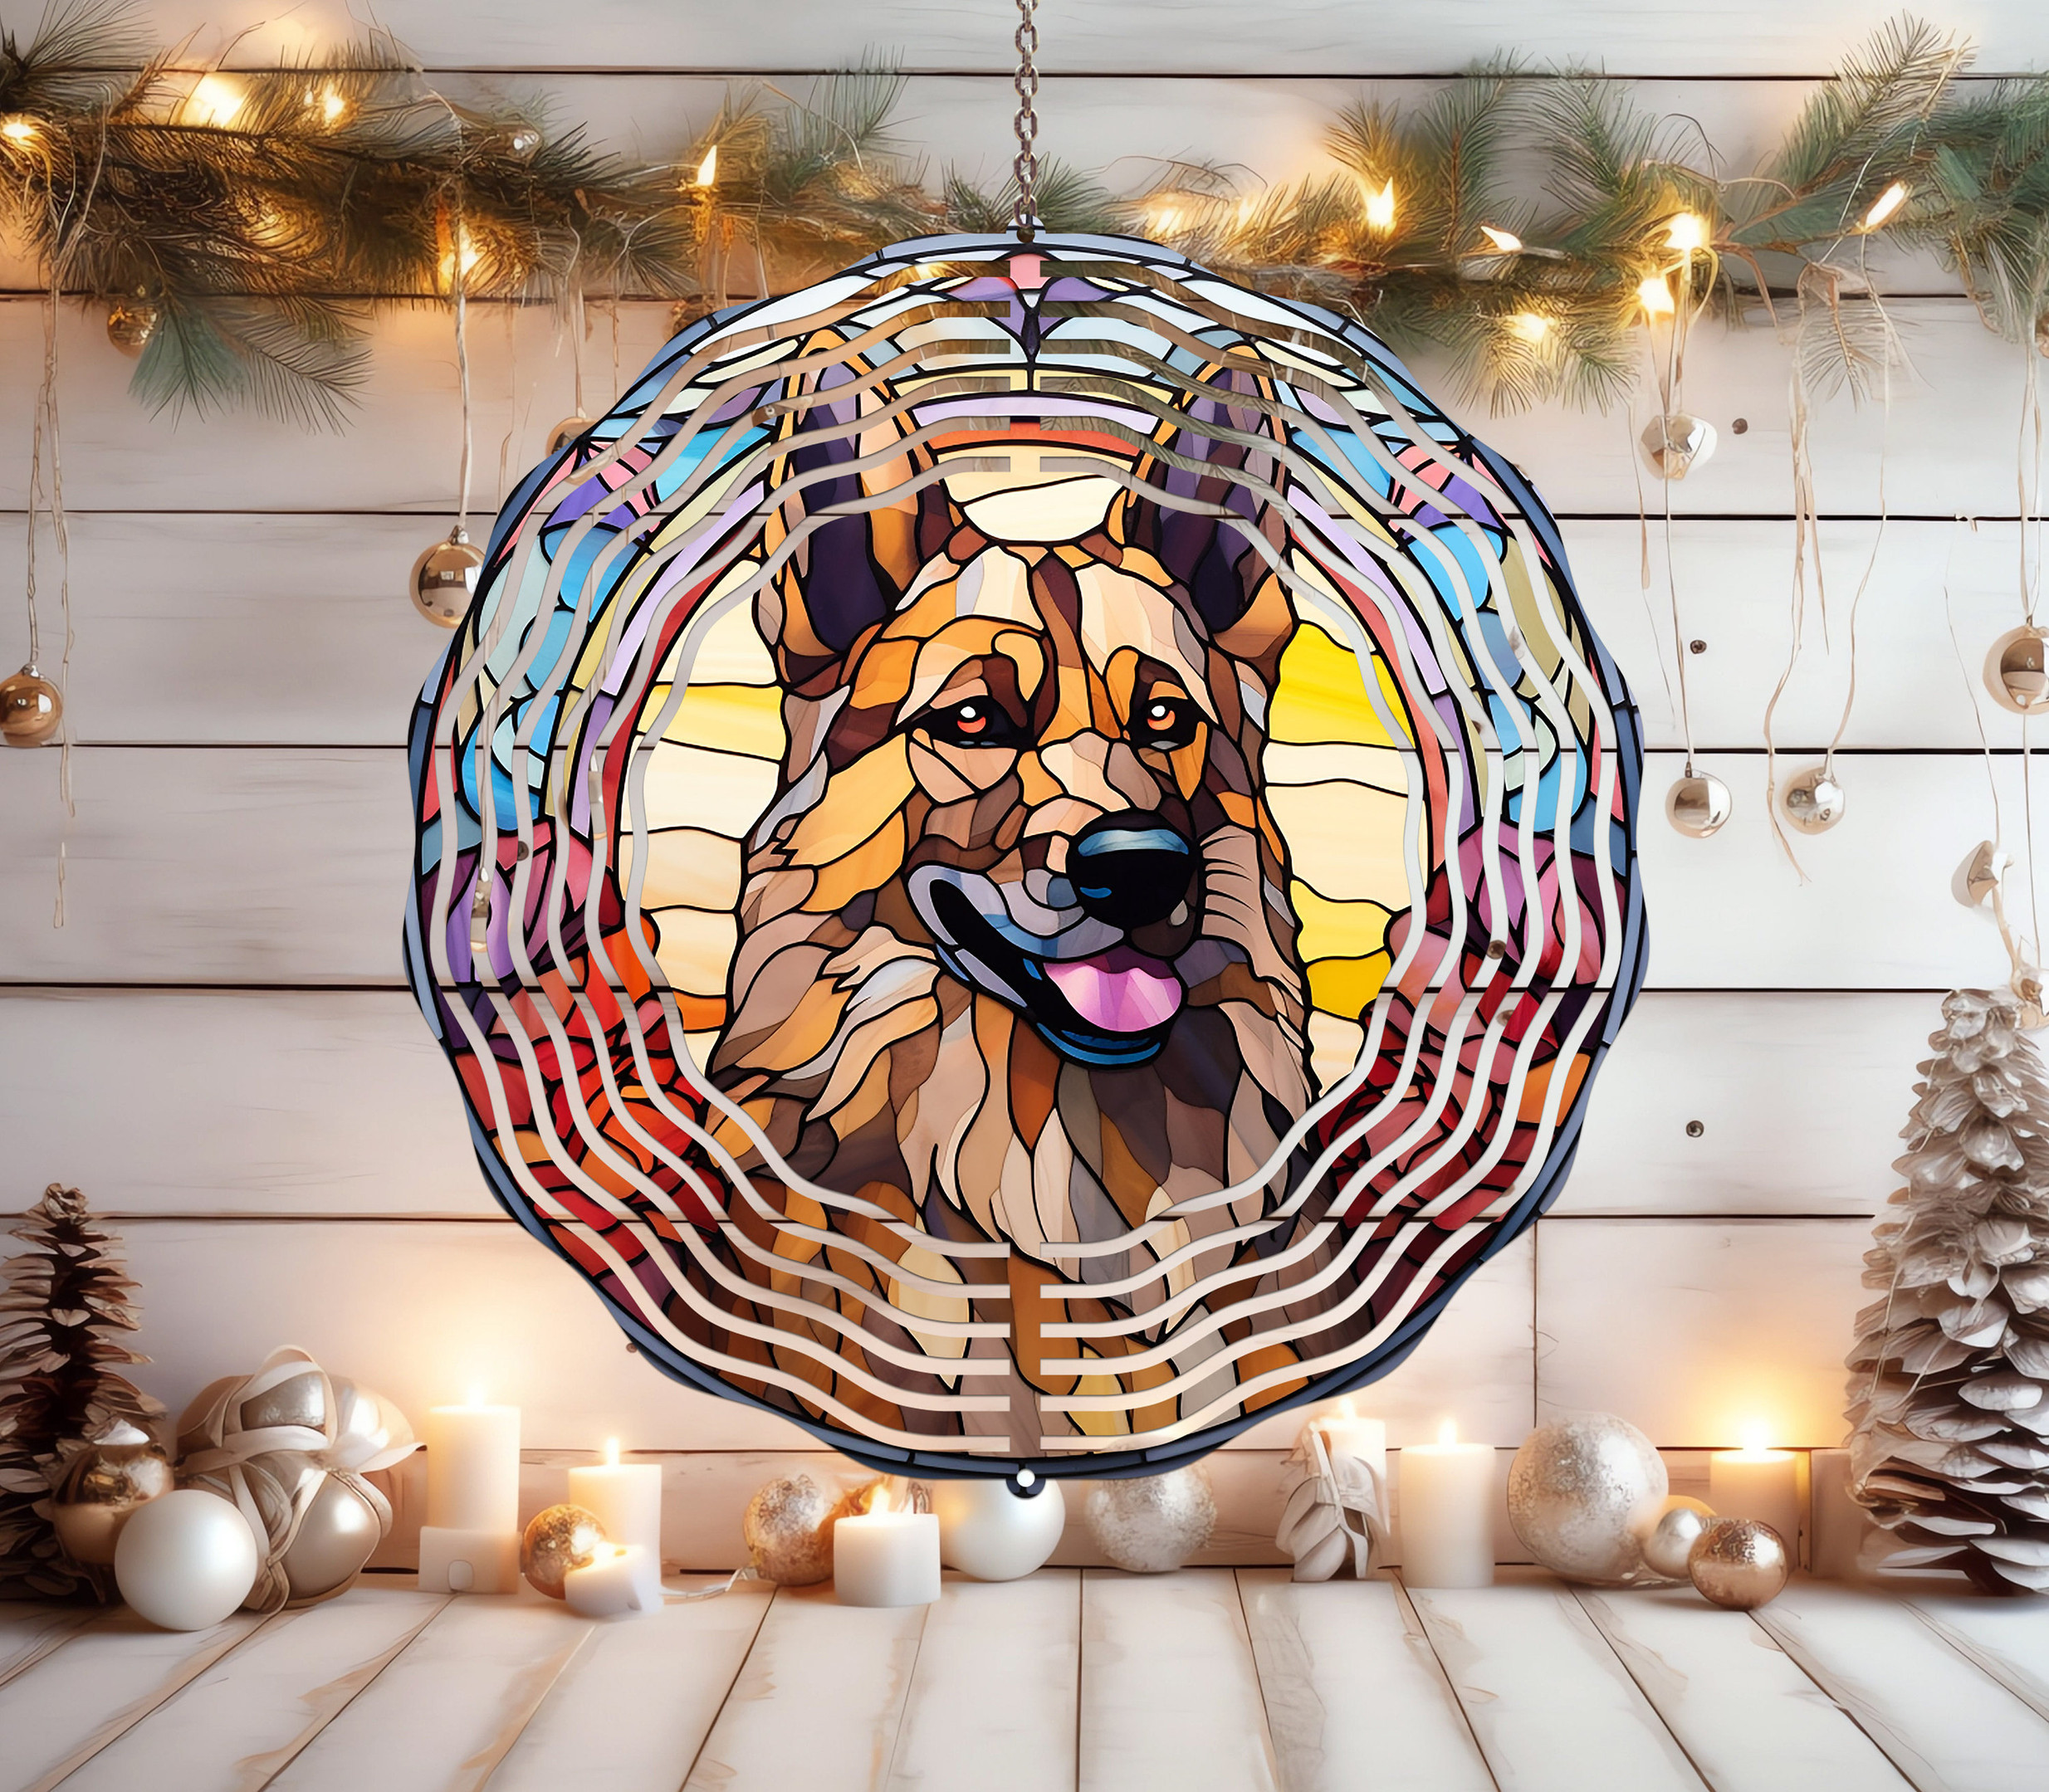 Stained Glass Dog Wind Spinner For Yard And Garden, Outdoor Garden Yard Decoration, Garden Decor, Chime Art Gift